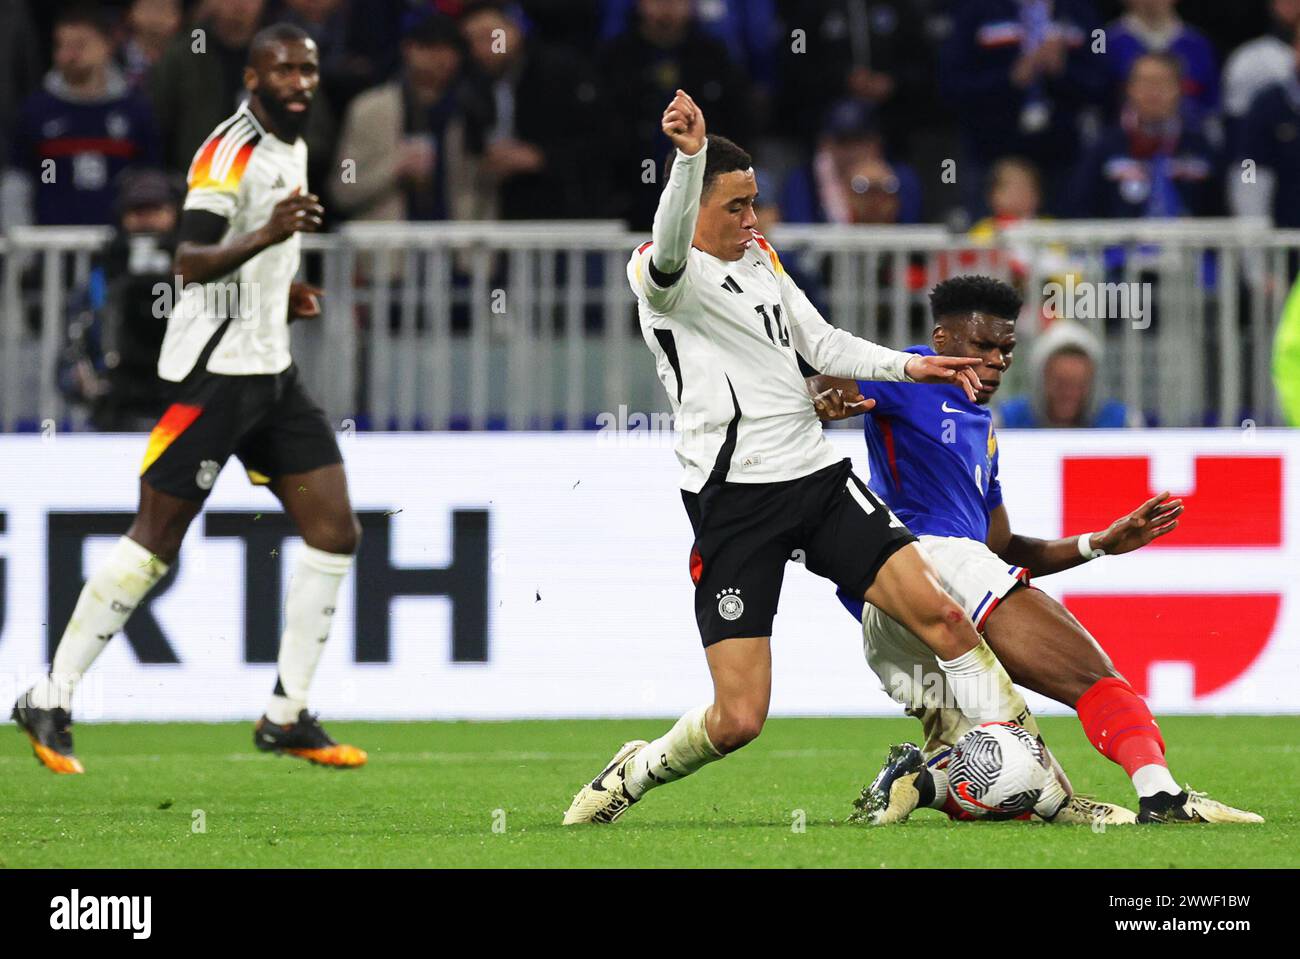 Lyon, France. 23rd Mar, 2024. Soccer: International match, France - Germany, Groupama Stadium. Germany's Jamal Musiala (center) and France's Aurelien Tchouameni (right) fight for the ball. Credit: Christian Charisius/dpa/Alamy Live News Stock Photo